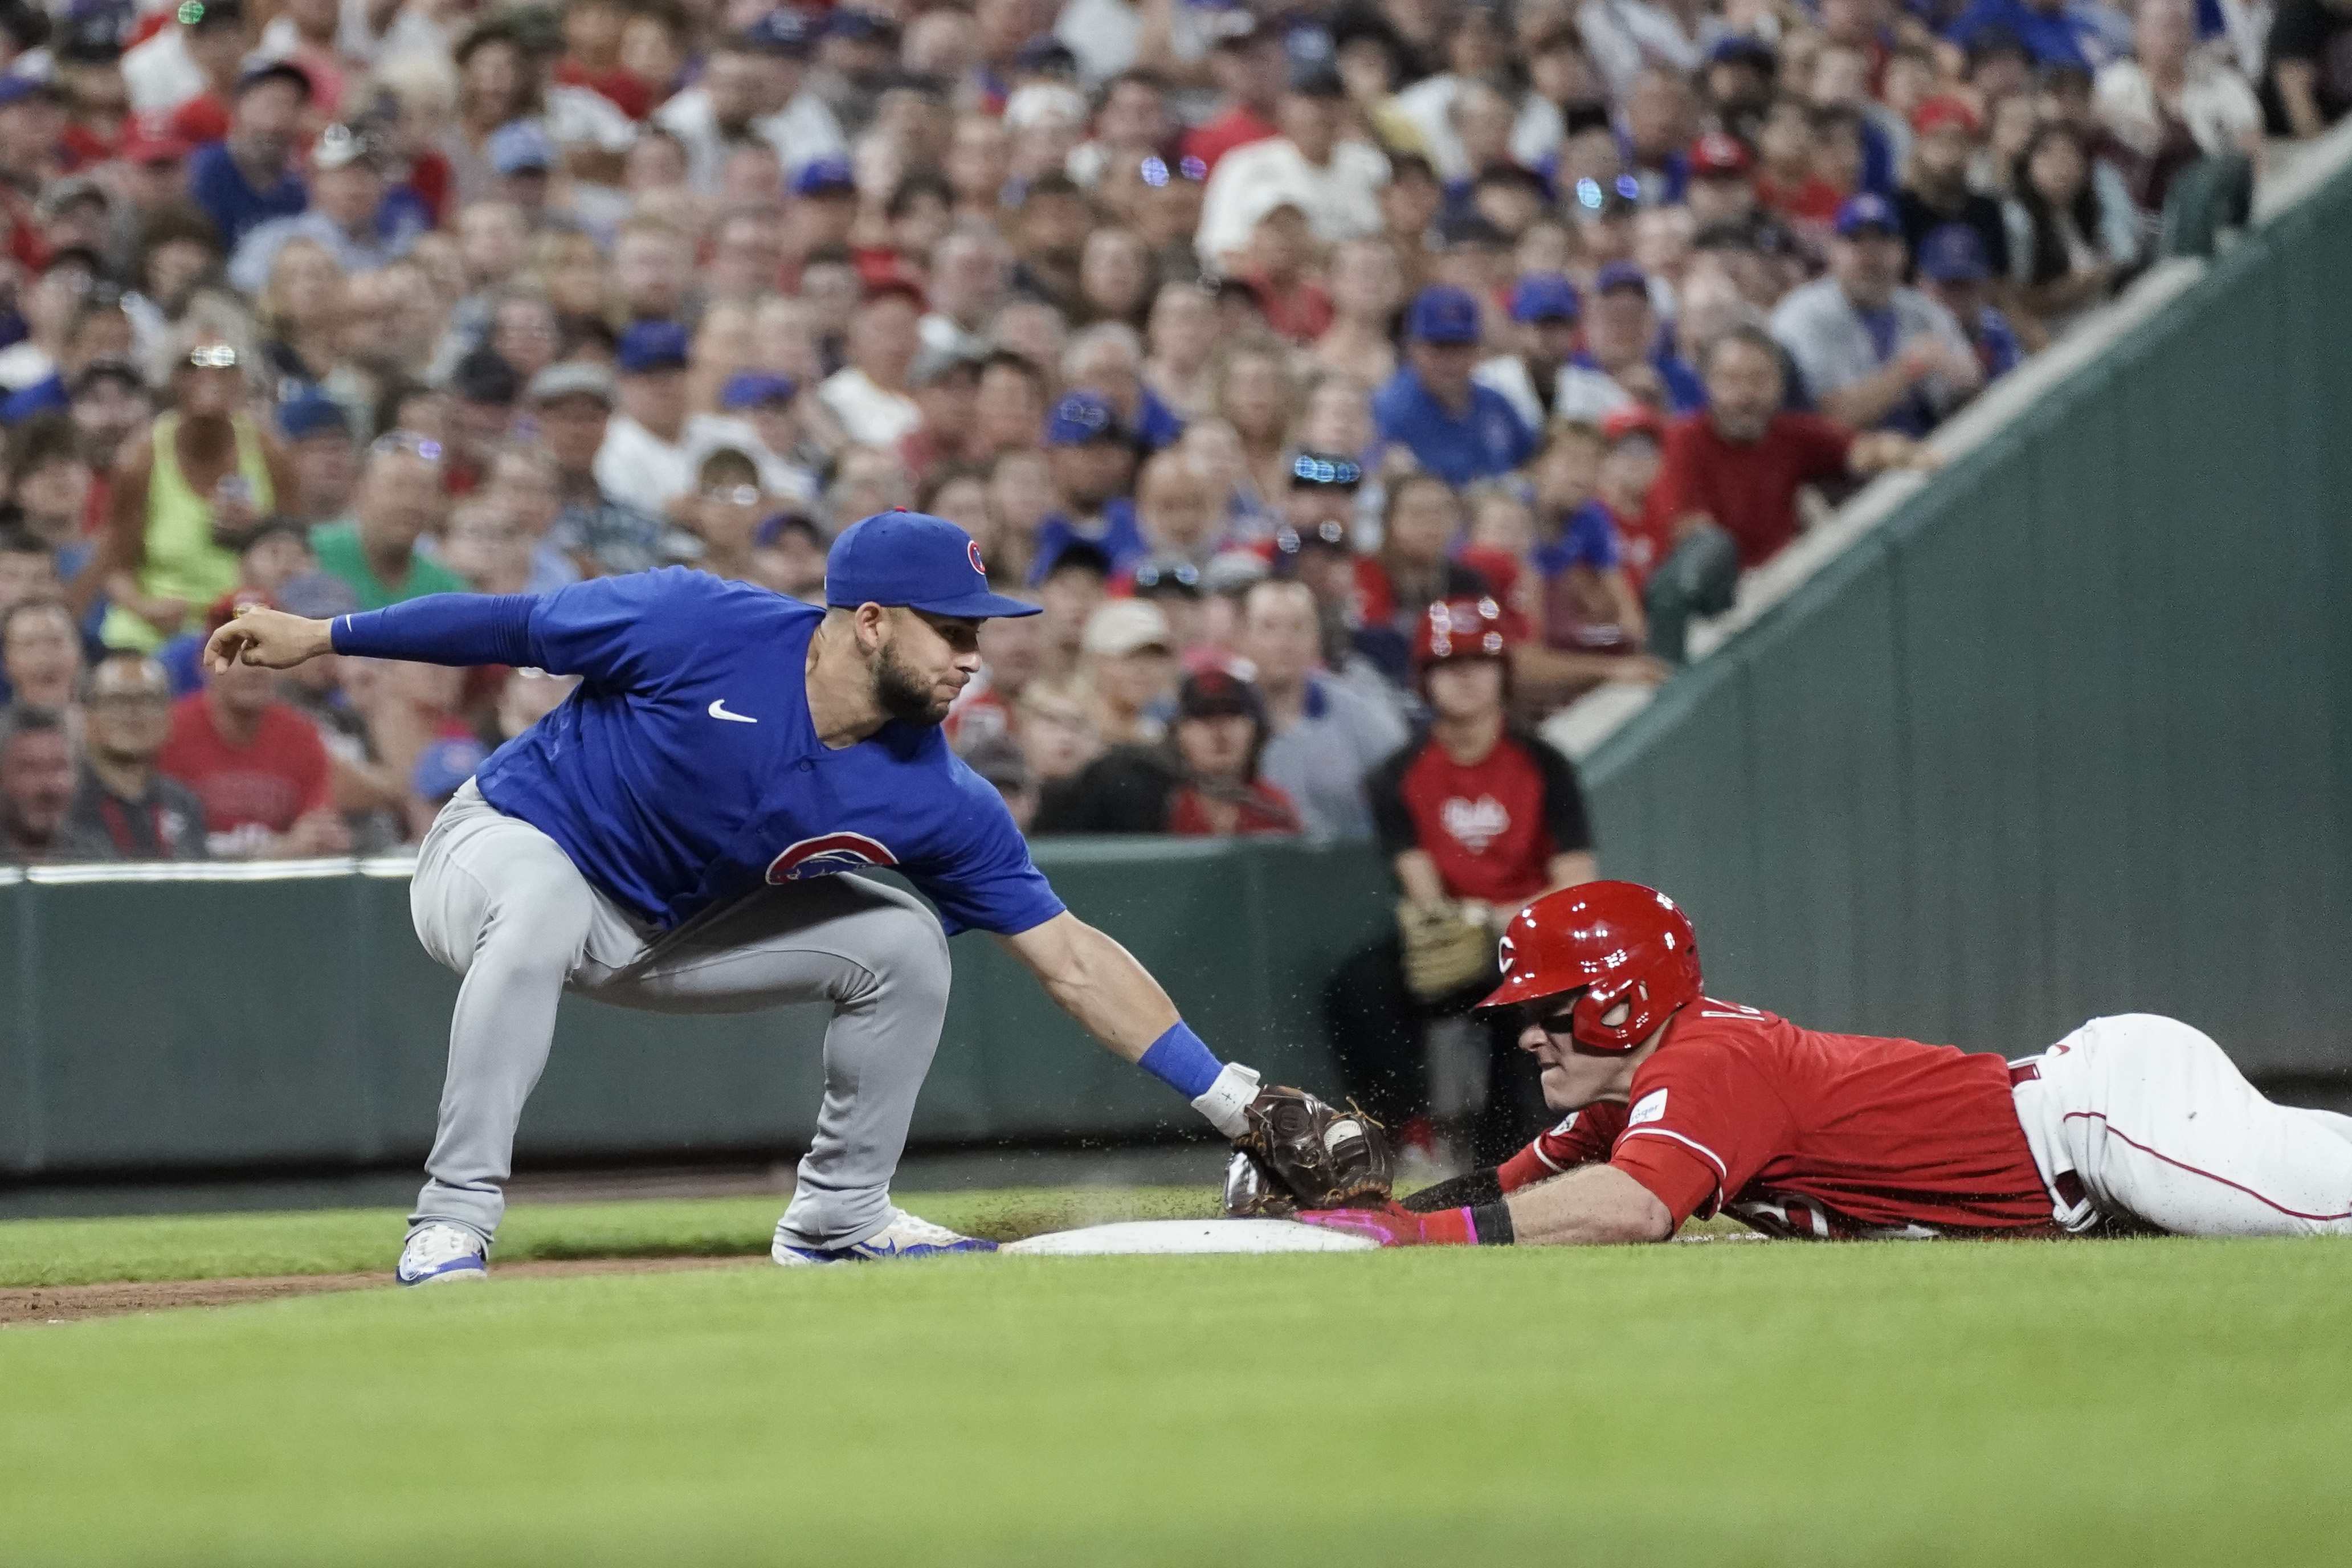 Tempers flare at conclusion of Reds-Cubs game, Reds hope for 'fair